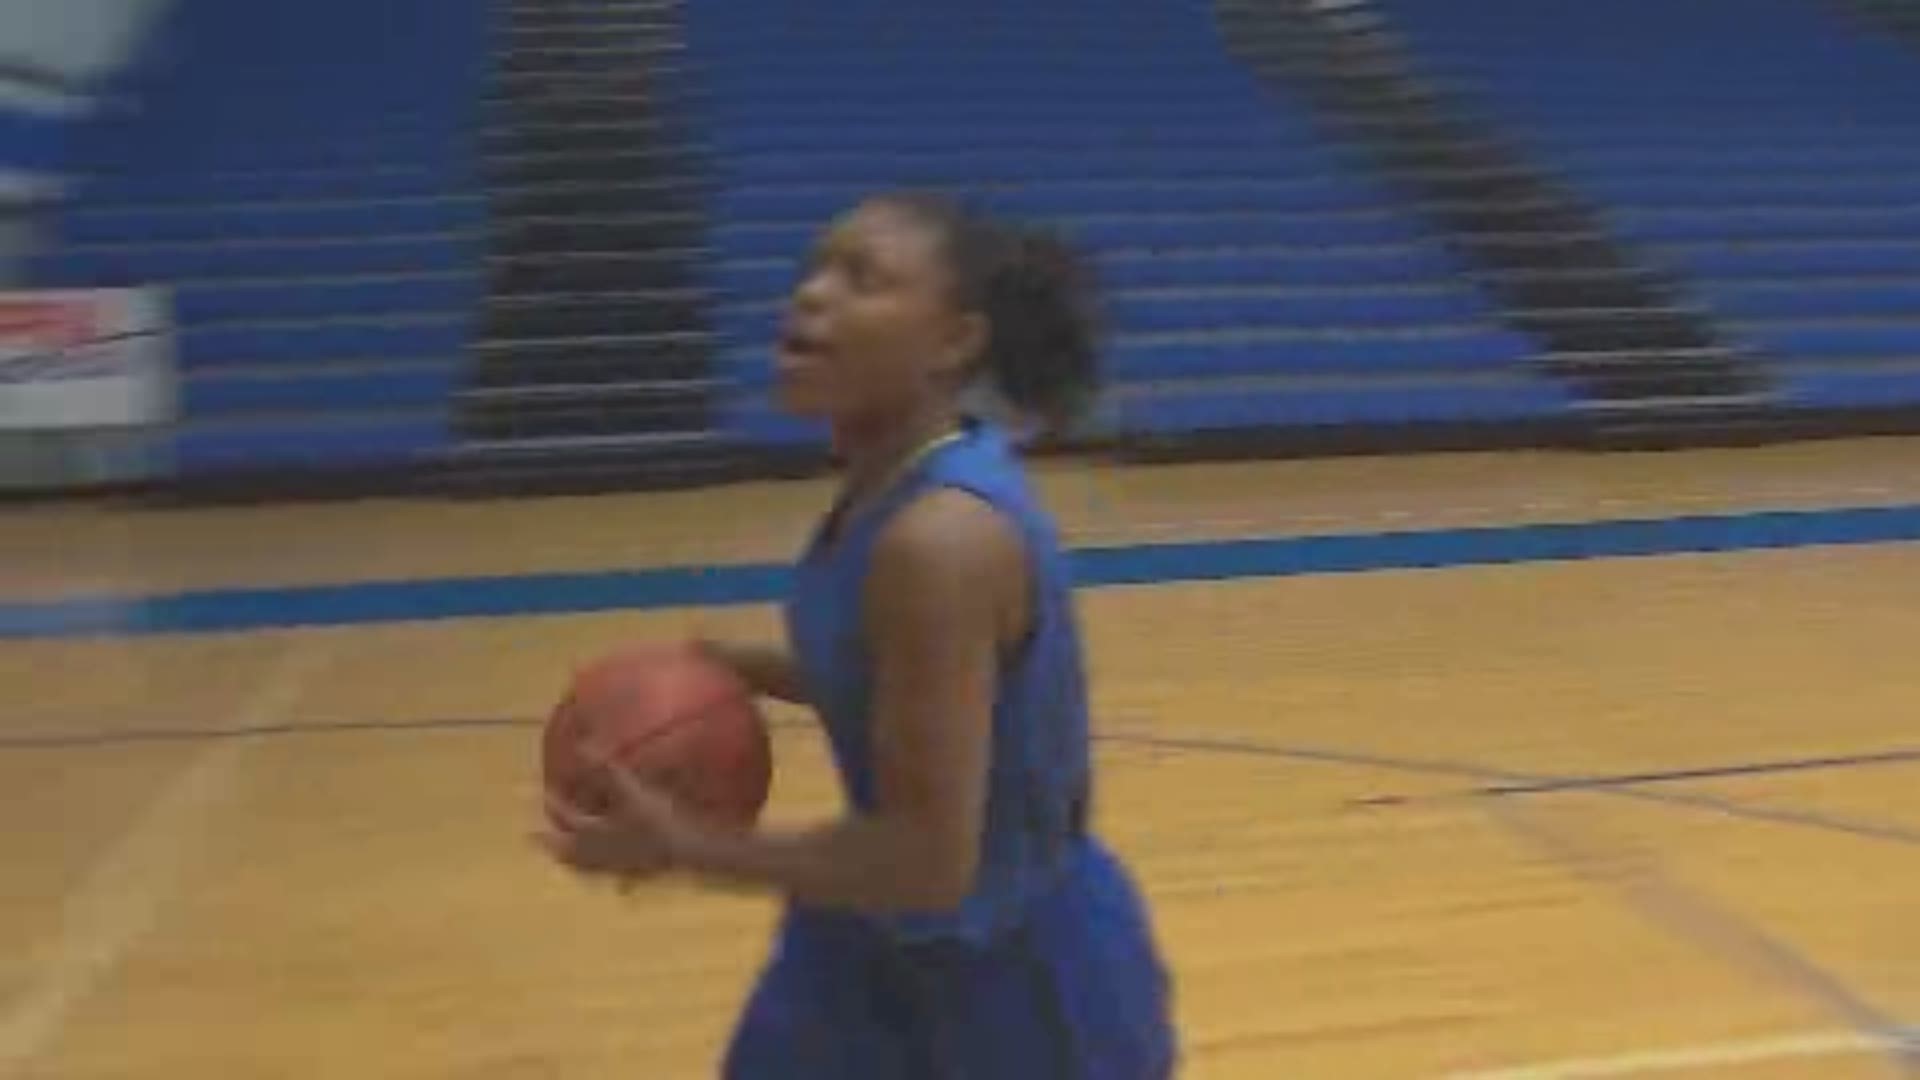 Congratulations to Destini Hall of Clear Springs of being named KHOU 11 Sports Athlete of the Week!